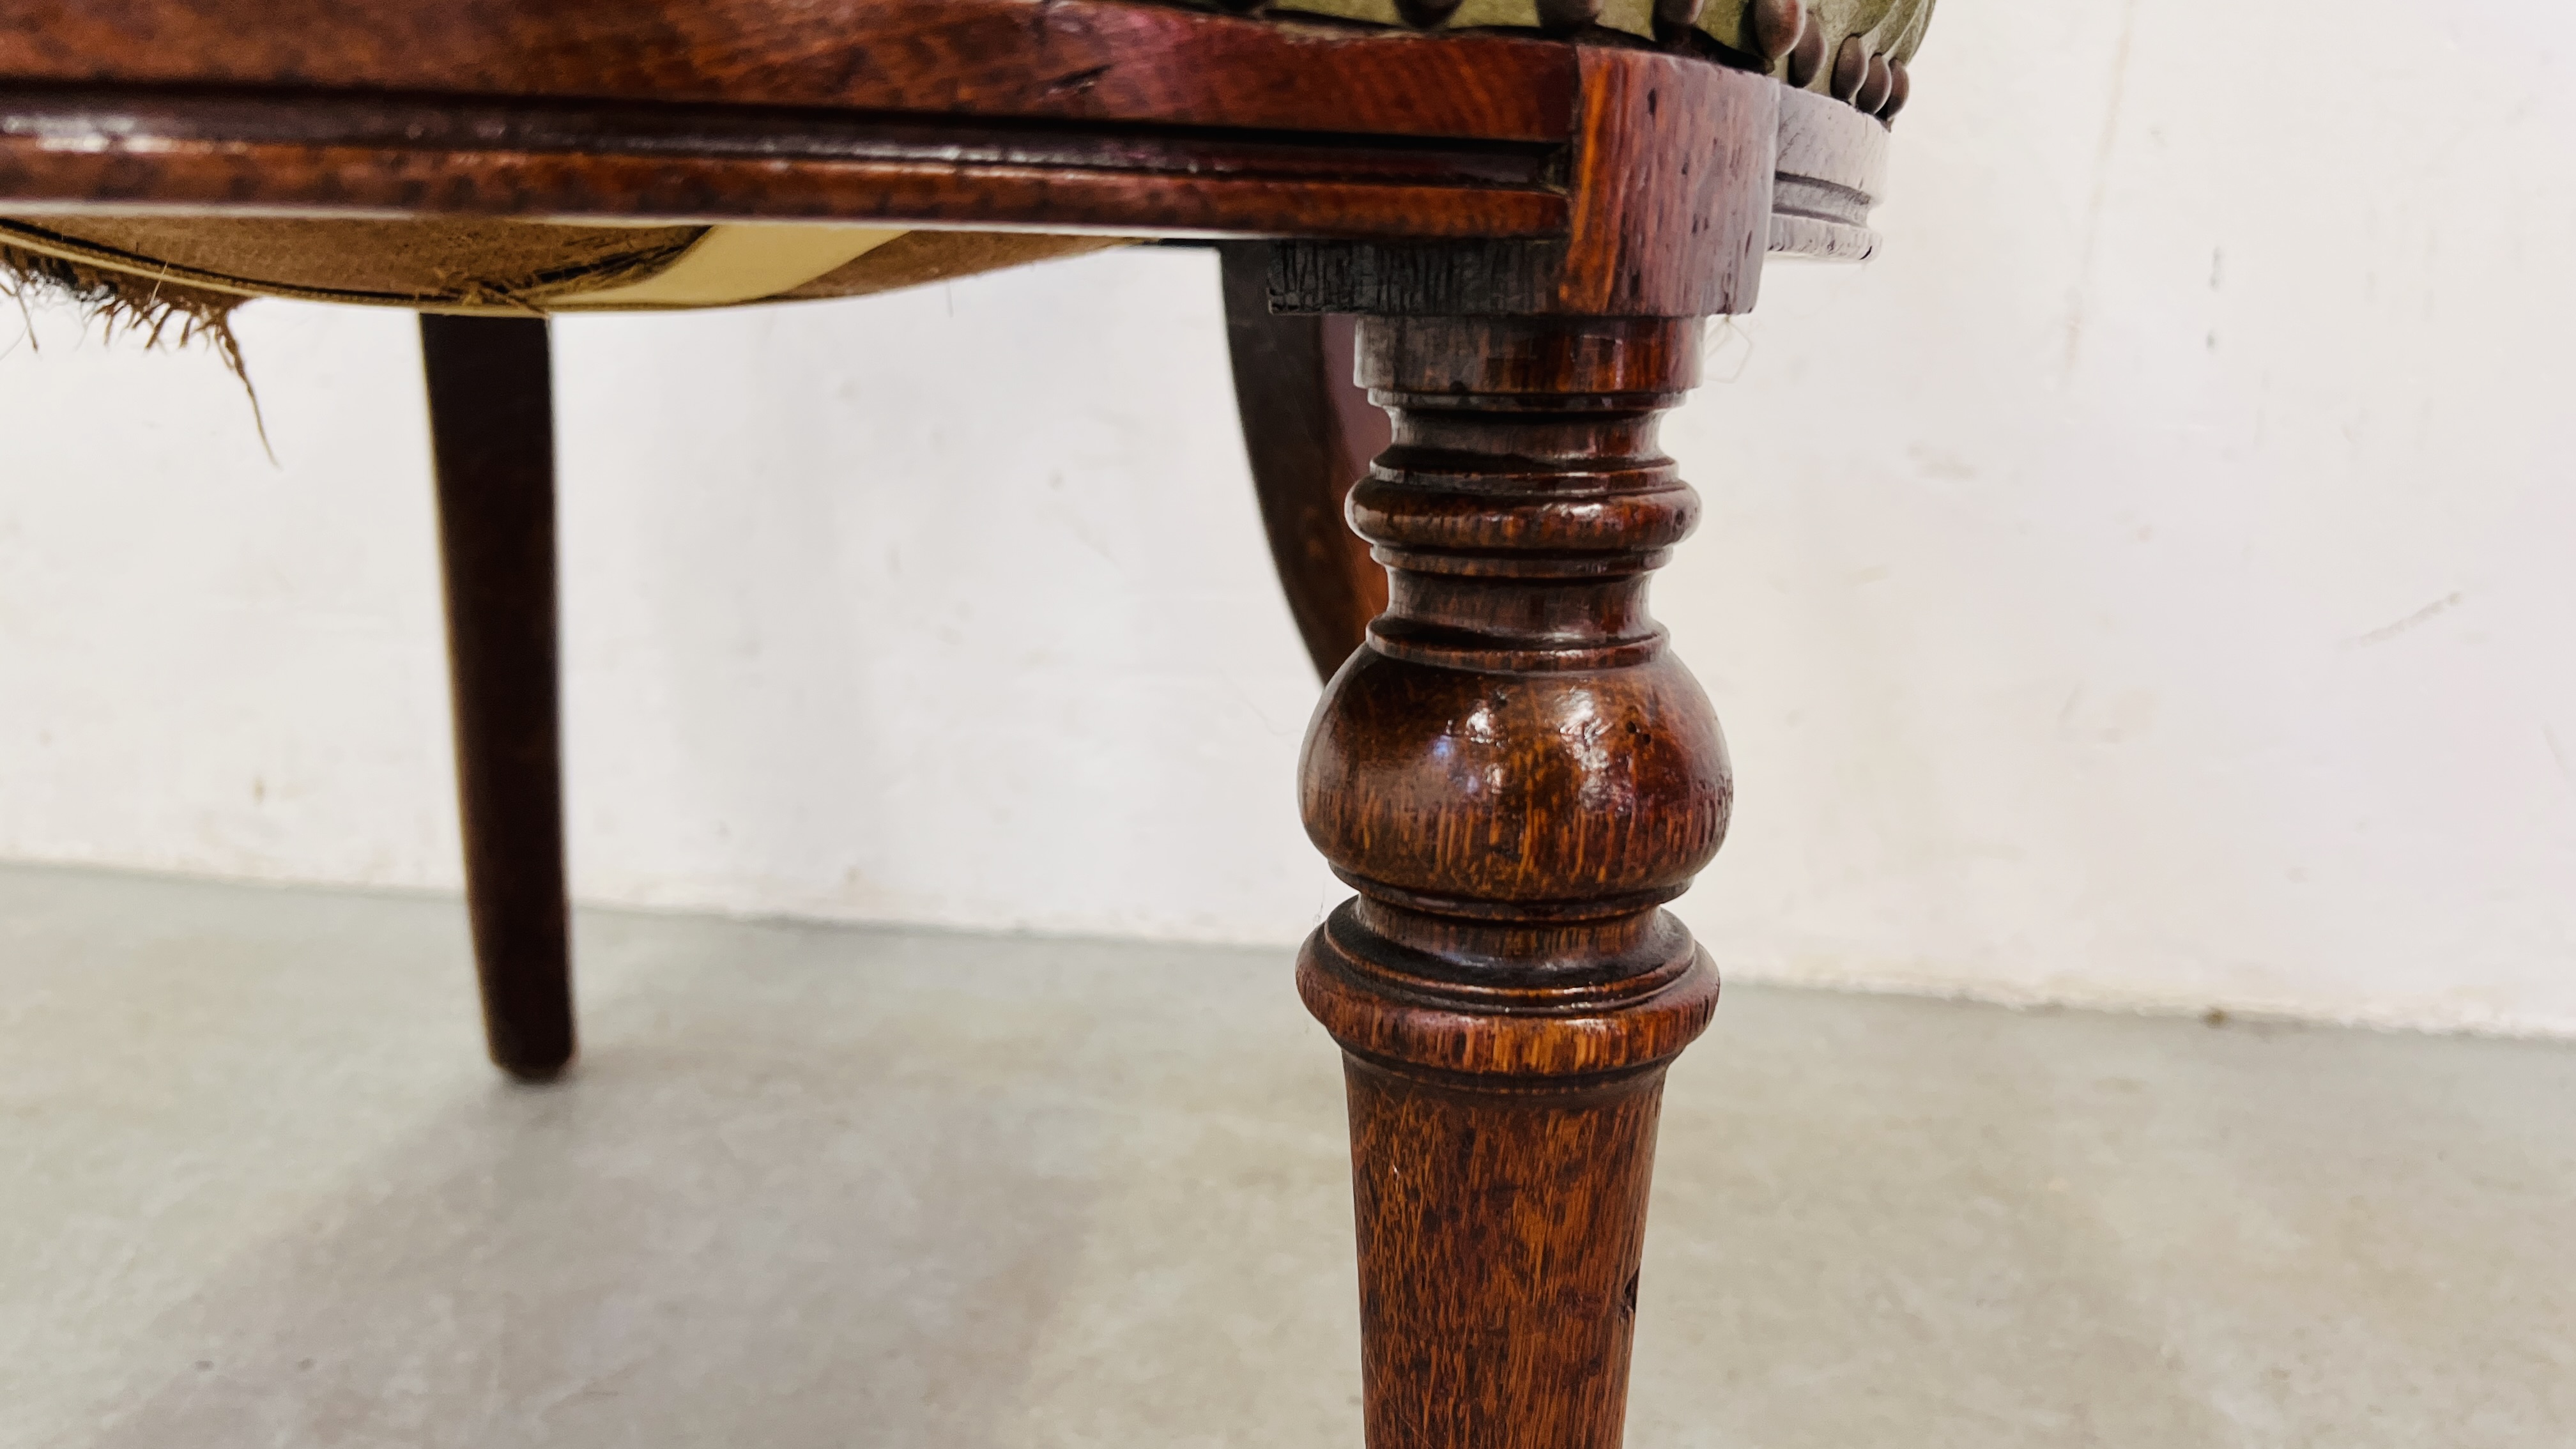 AN ANTIQUE OAK FRAMED TUB CHAIR WITH BOTTLE GREEN LEATHER UPHOLSTERY AND STUD DETAILING. - Image 5 of 7